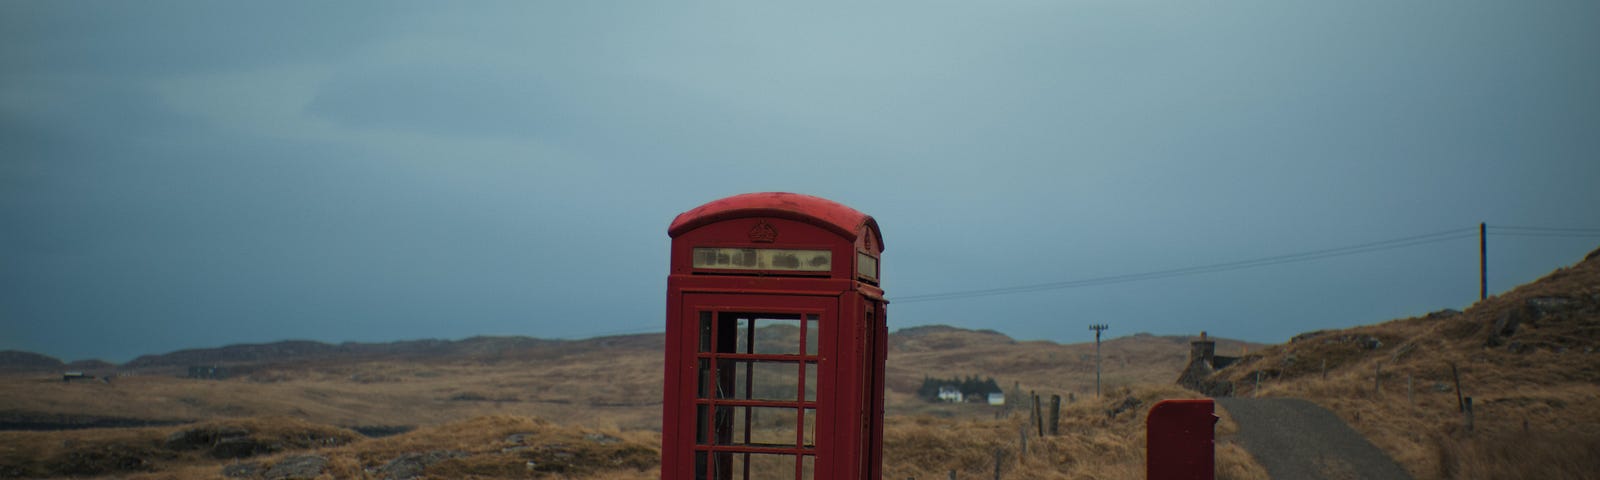 An abandoned red British phone booth in a barren landscape